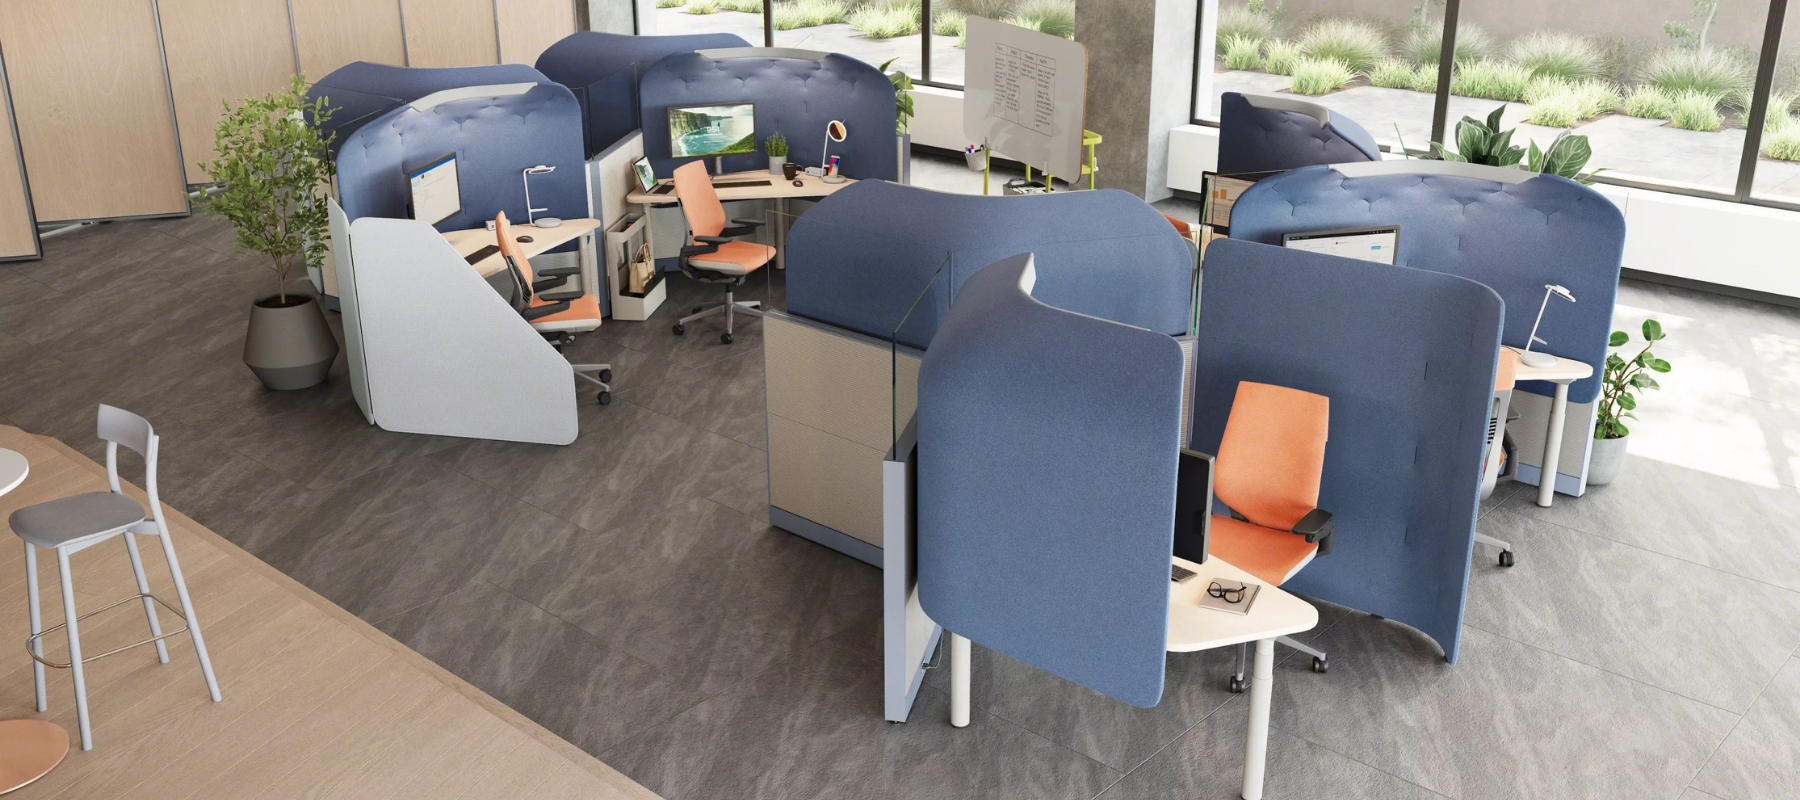 Workstations with acoustic panels wrapped around them for privacy and control